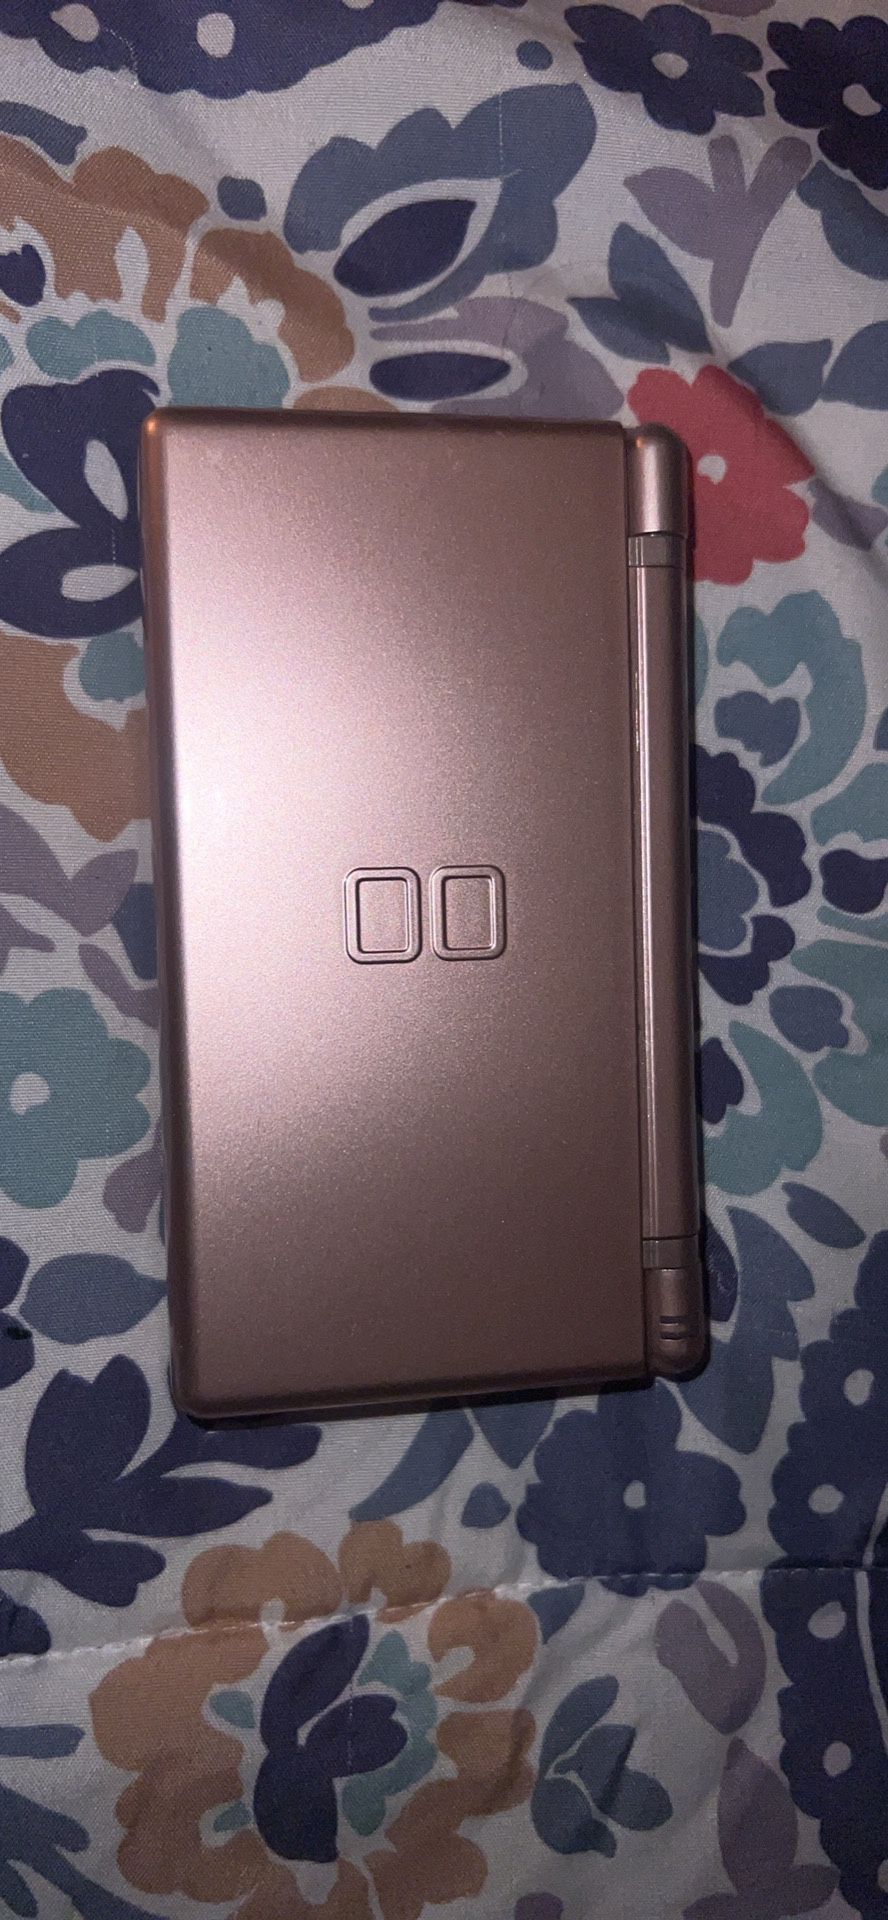 Metallic Pink Ds Lite With Original Stylus And Game Boy Slot Cover 